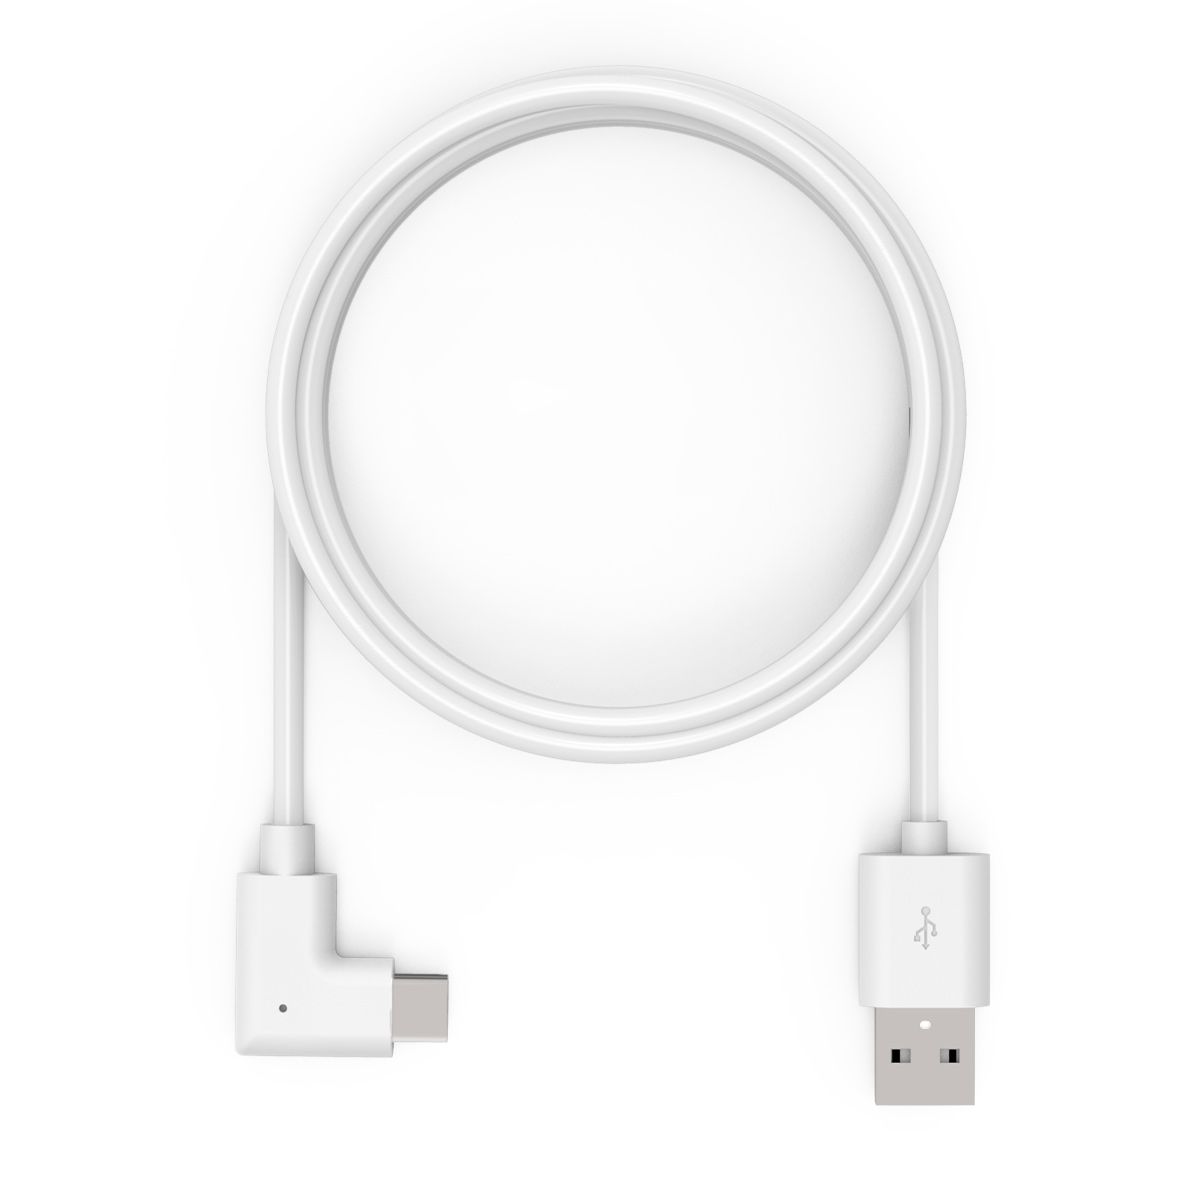 USB-C to Lightning Right Angle Cable - 30 Centimeters